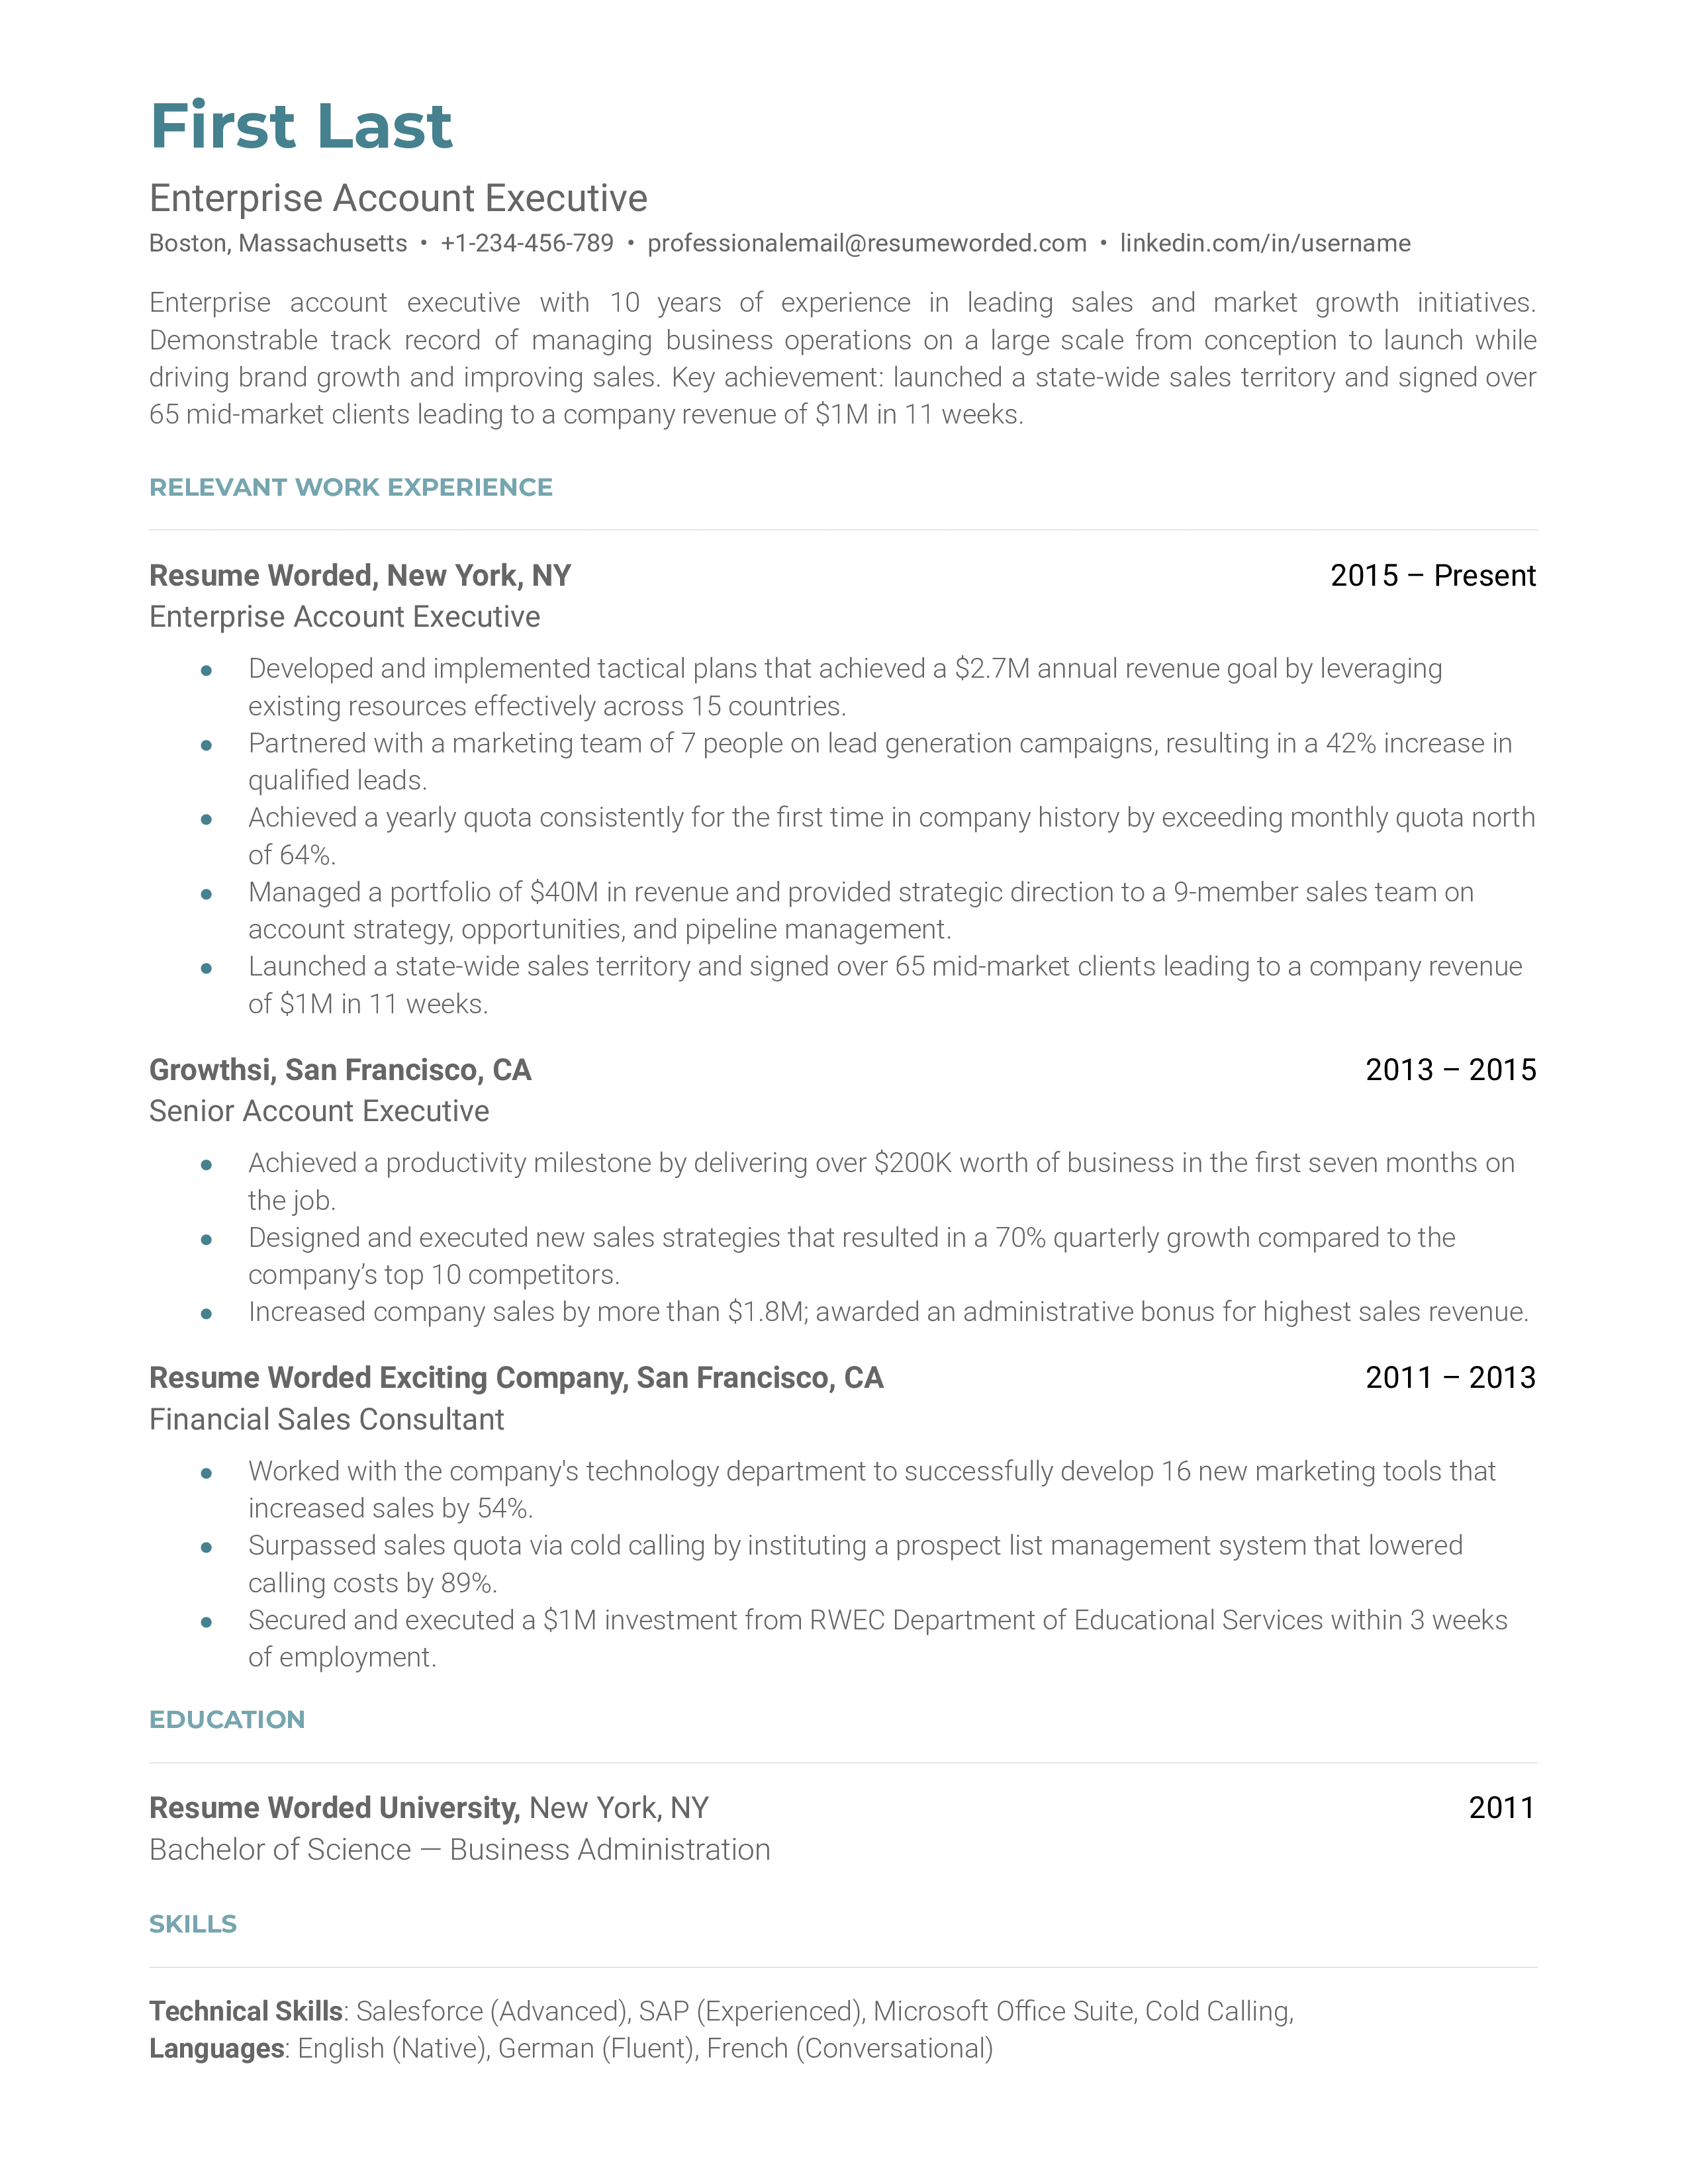 An enterprise account executive resume sample that highlights the applicant’s career progression and extra languages.